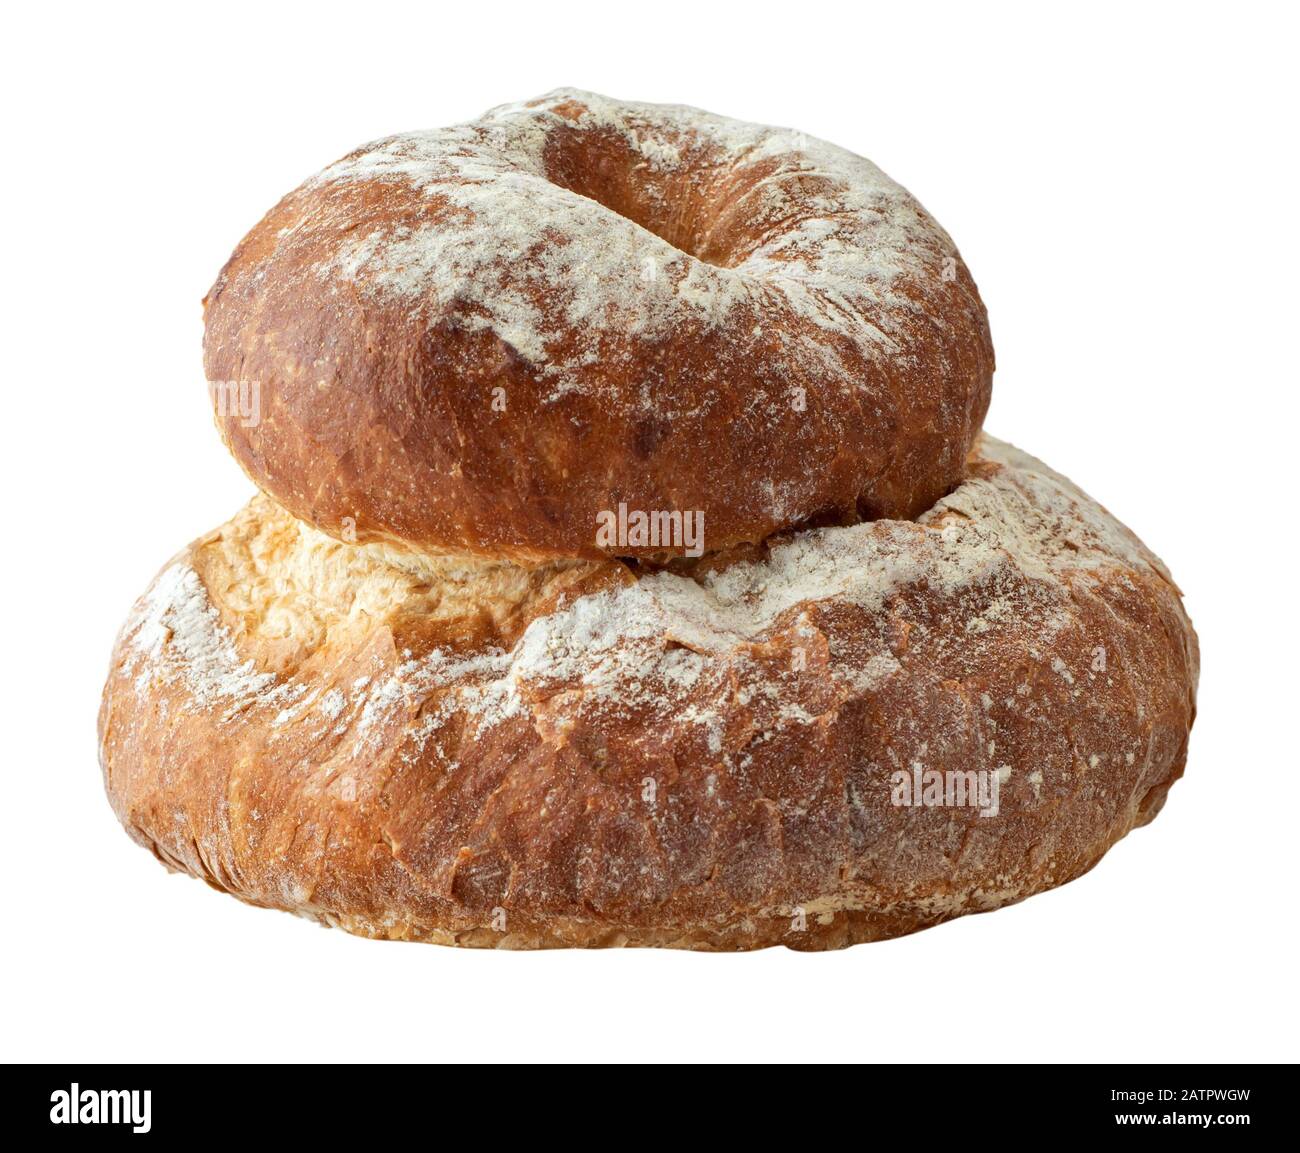 Bread image of a round cottage loaf isolated on a white background. Stock Photo